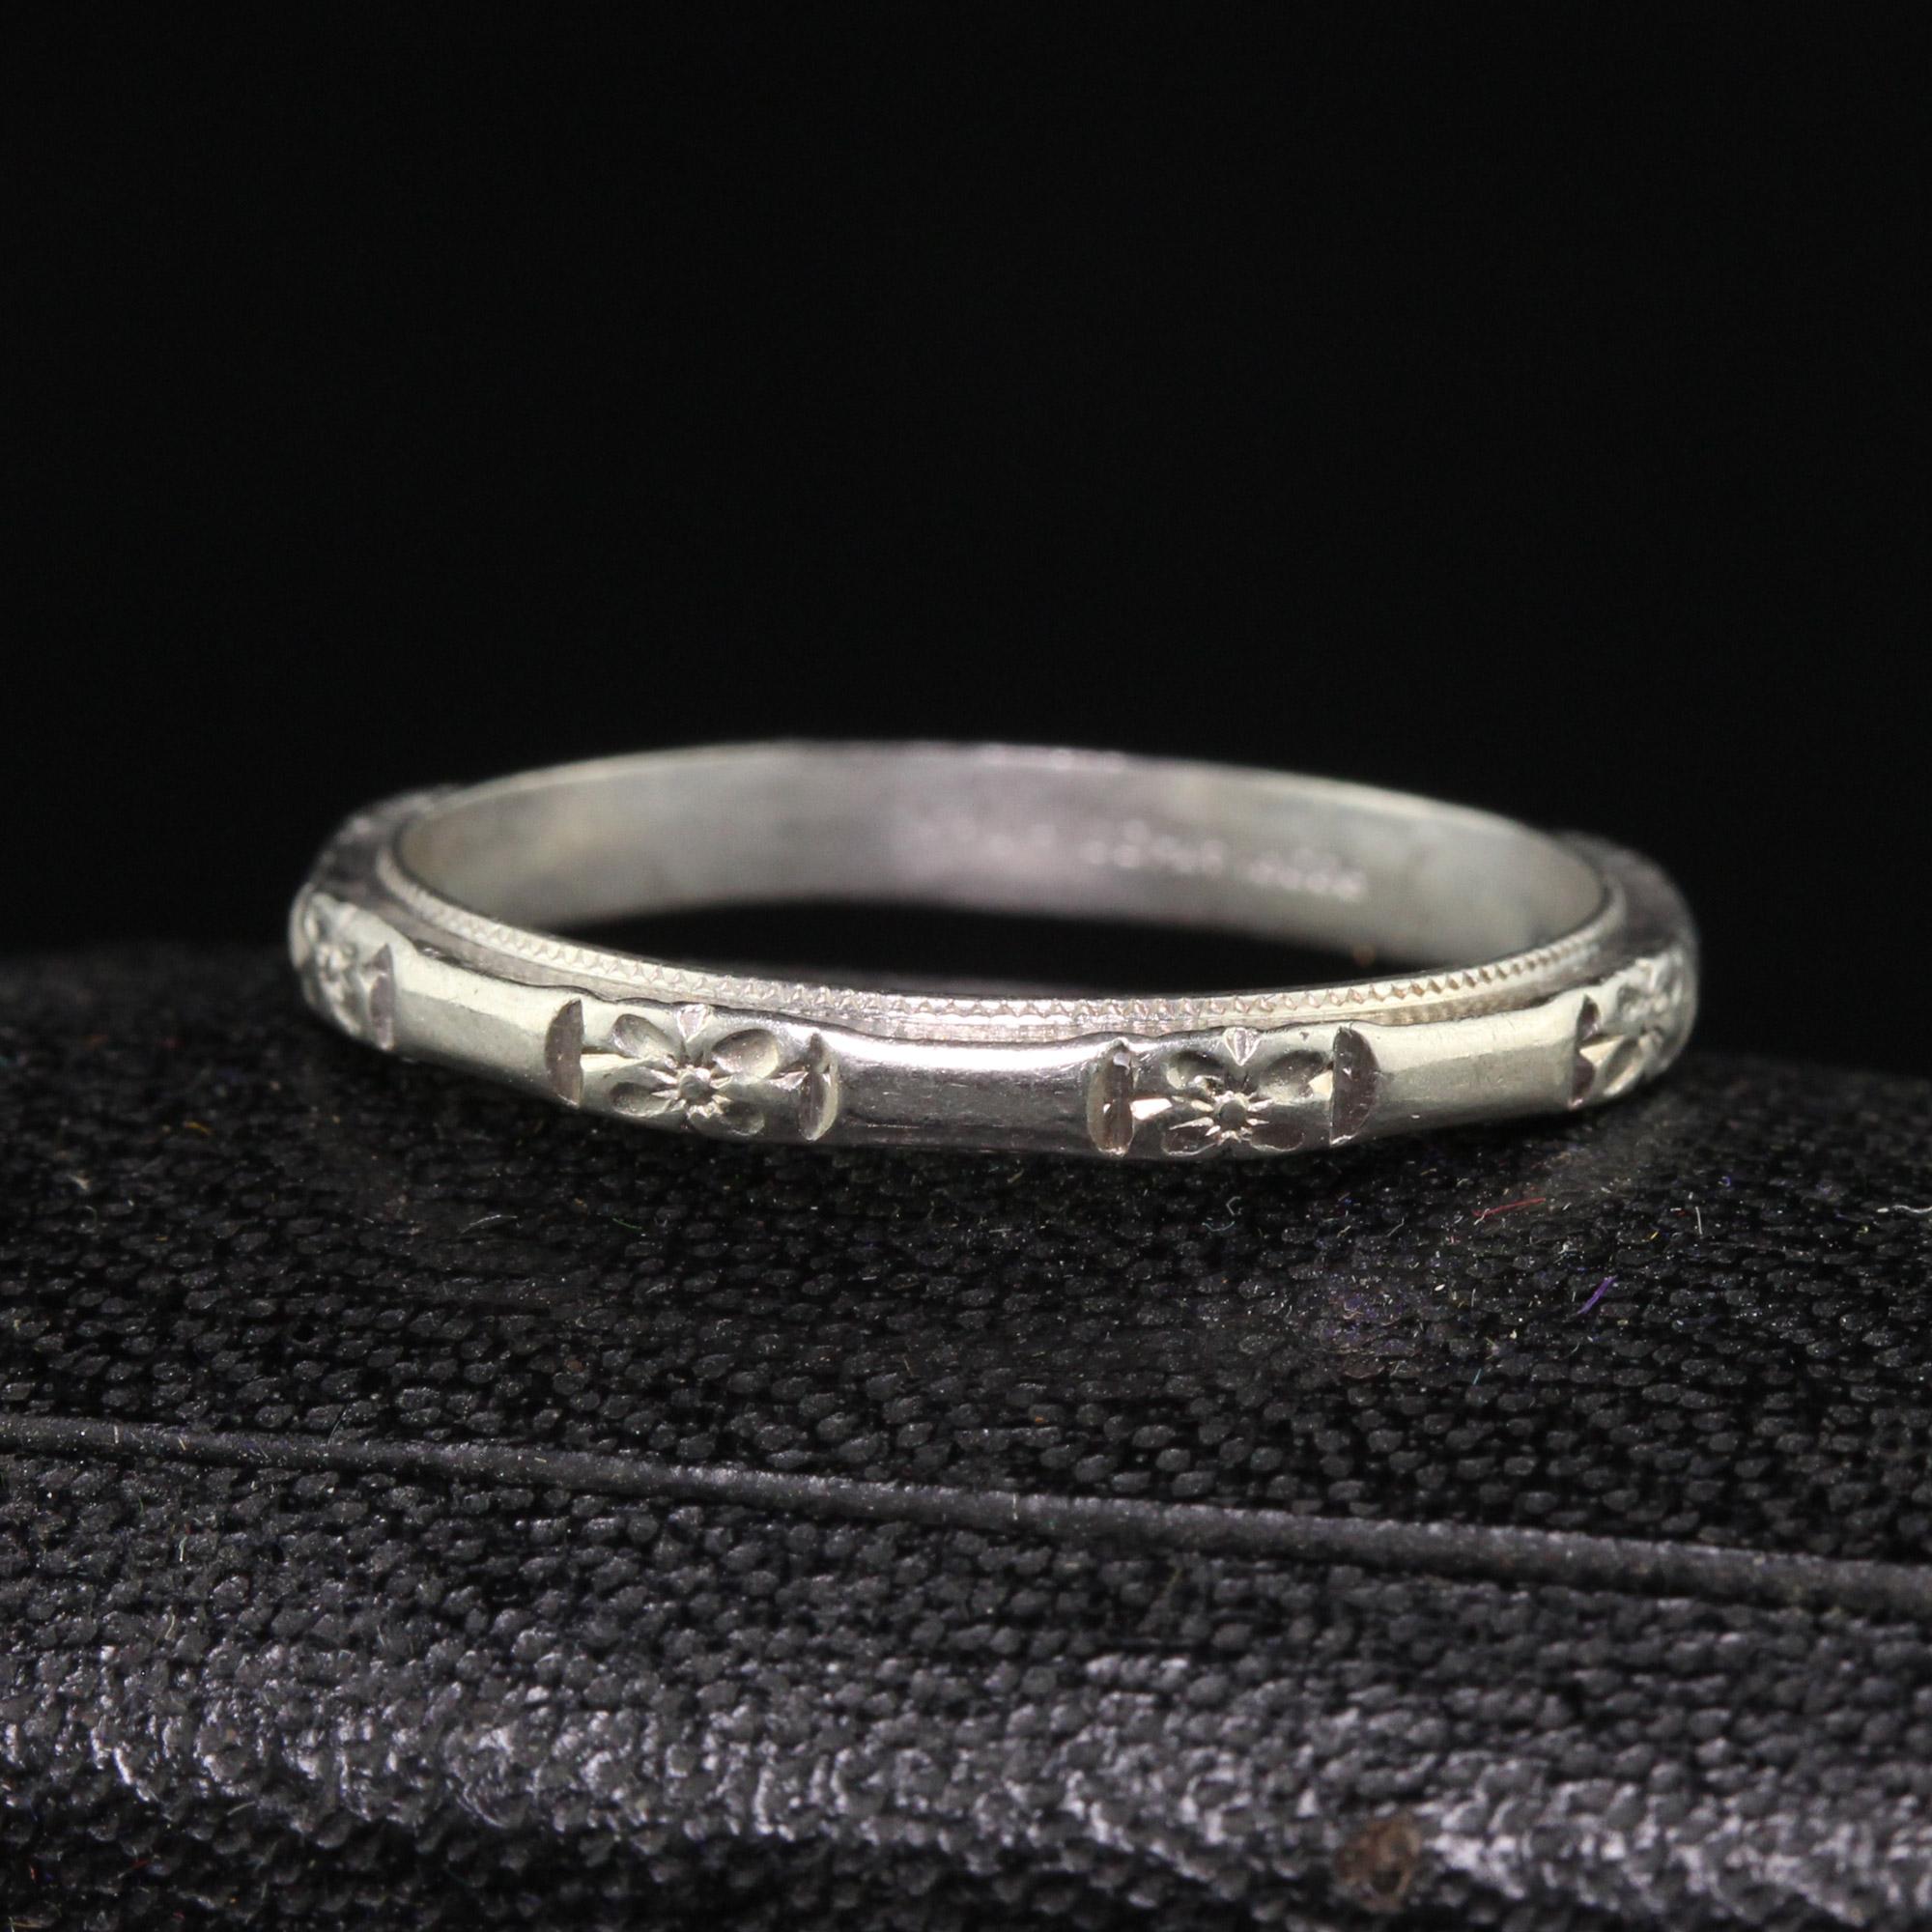 Beautiful Antique Art Deco Platinum Blossom Design Engraved Wedding Band - Size 5 1/2. This beautiful wedding band is crafted in platinum. The ring has crisp blossom engravings going around the entire ring and has milgraining on the sides as well.